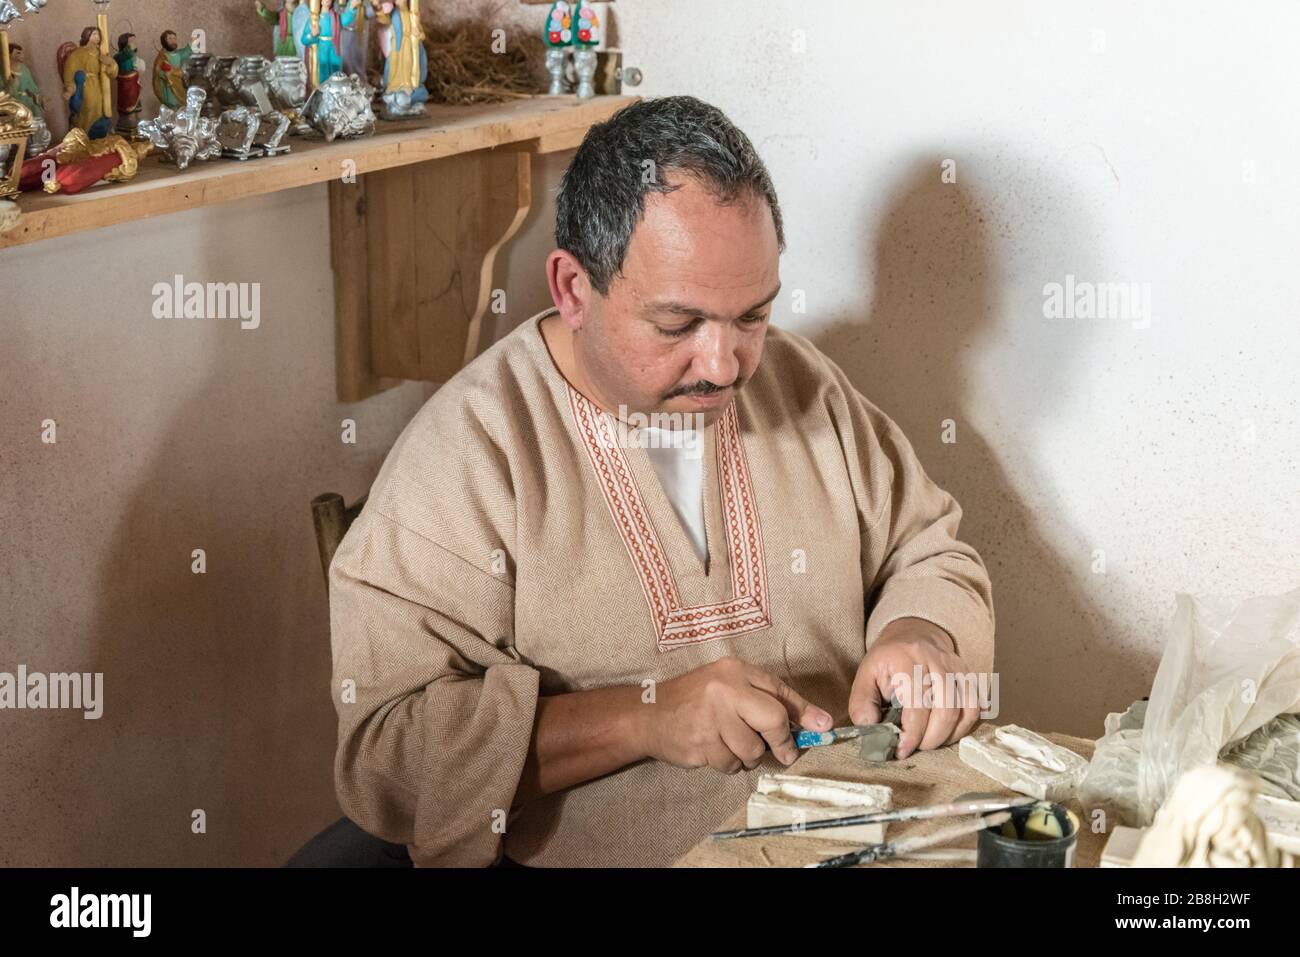 A man working creating clay statues with his hands in the village of Ghajnsielem in Gozo, Malta Stock Photo